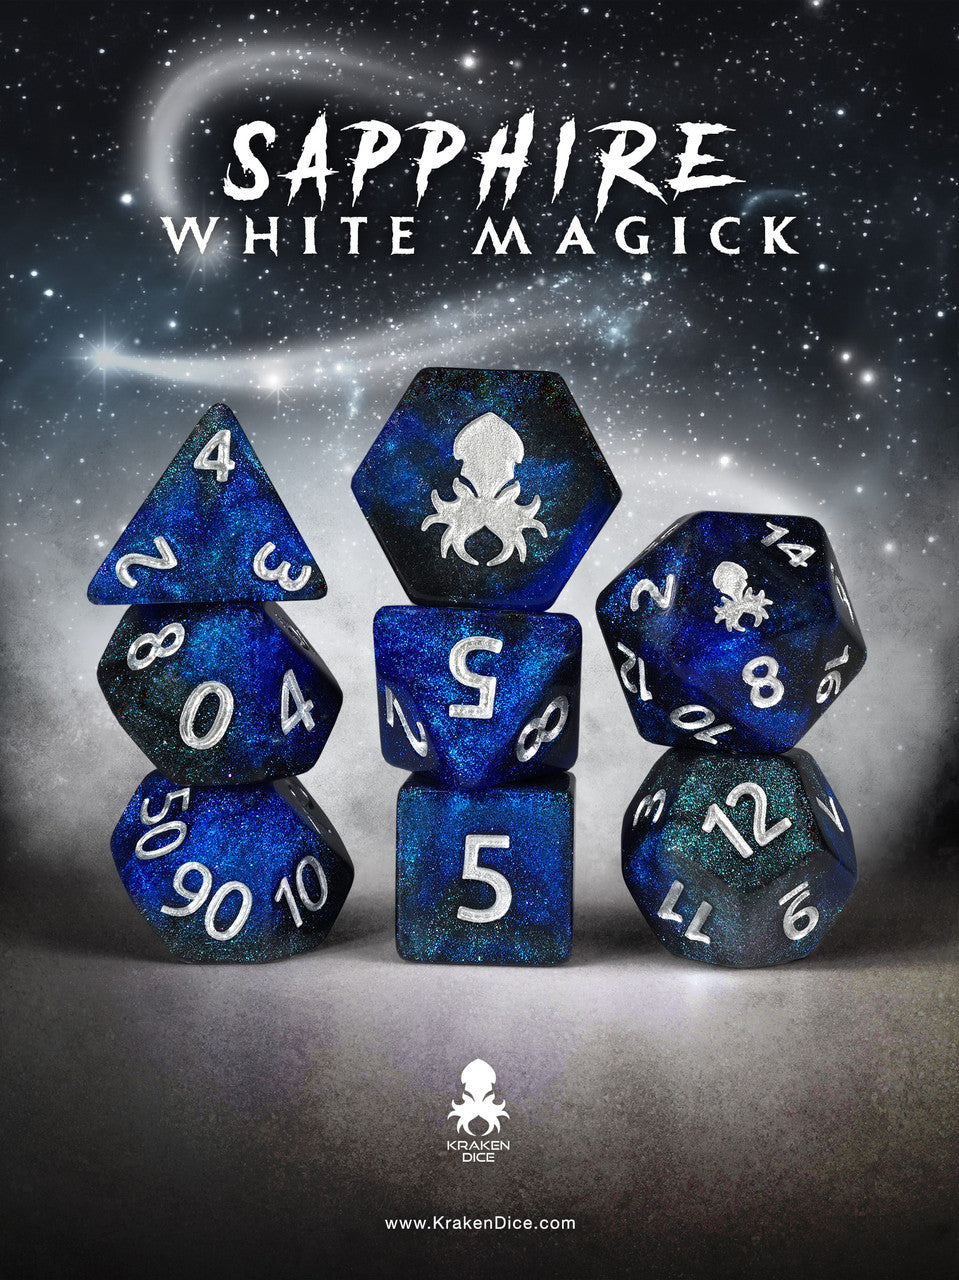 Sapphire White Magick 8pc Dice Set inked in Silver